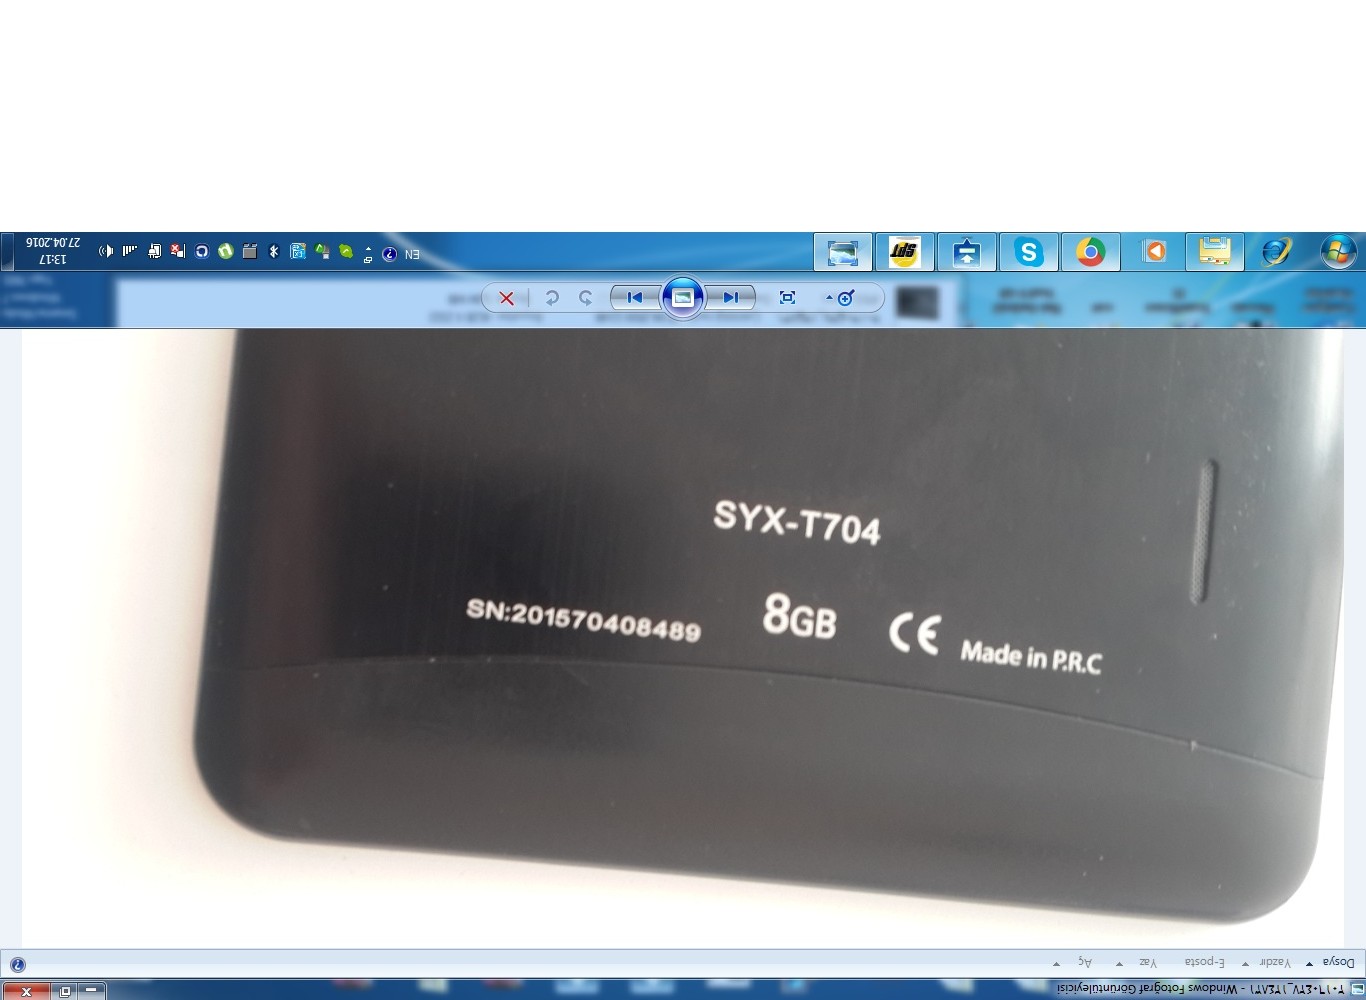 syrox syx-t704 firmware